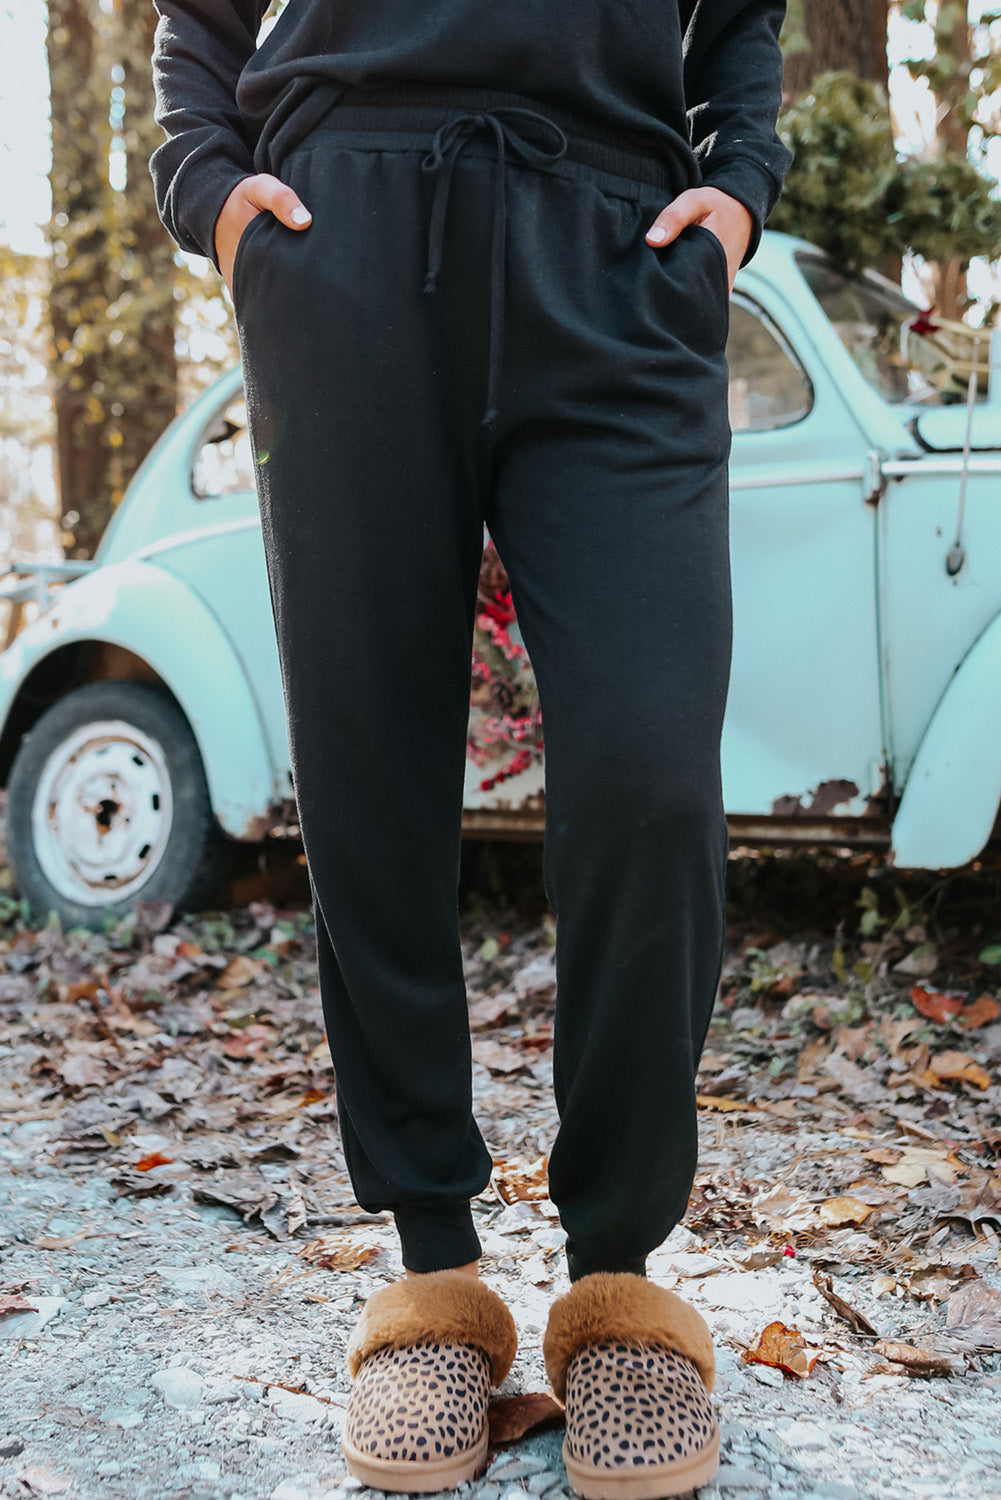 LC15306-2-S, LC15306-2-M, LC15306-2-L, LC15306-2-XL, LC15306-2-2XL, Black Women's Long Sleeve Sweatsuit Set Pullover and Jogger Pants Lounge Set